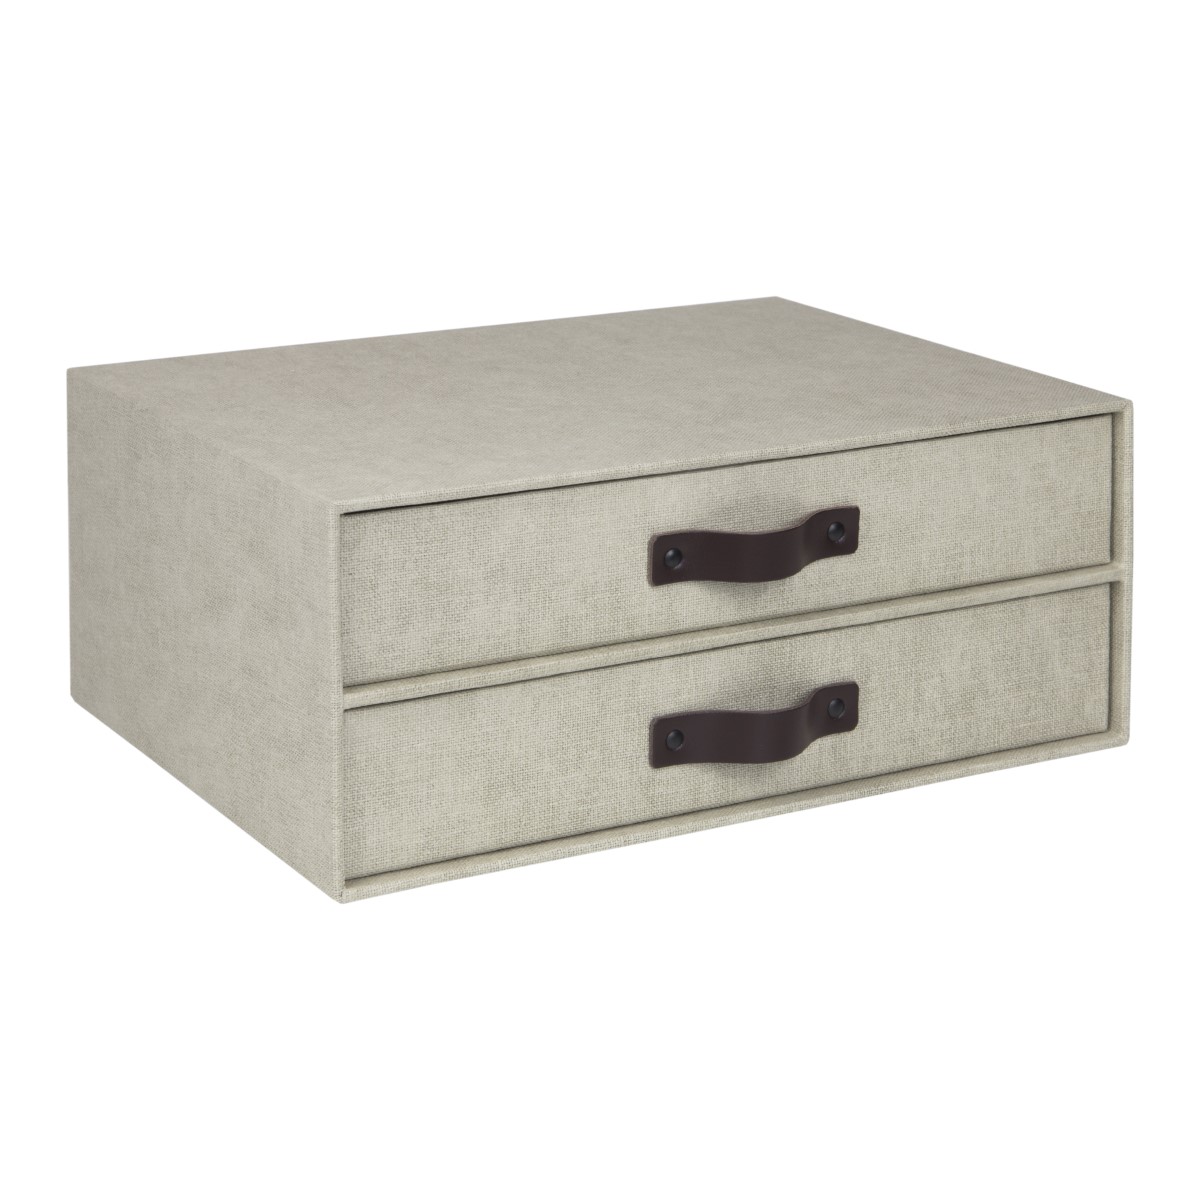 Birger Document Storage Linen in the group Hobby & Creativity / Organize / Home Office at Pen Store (127289)